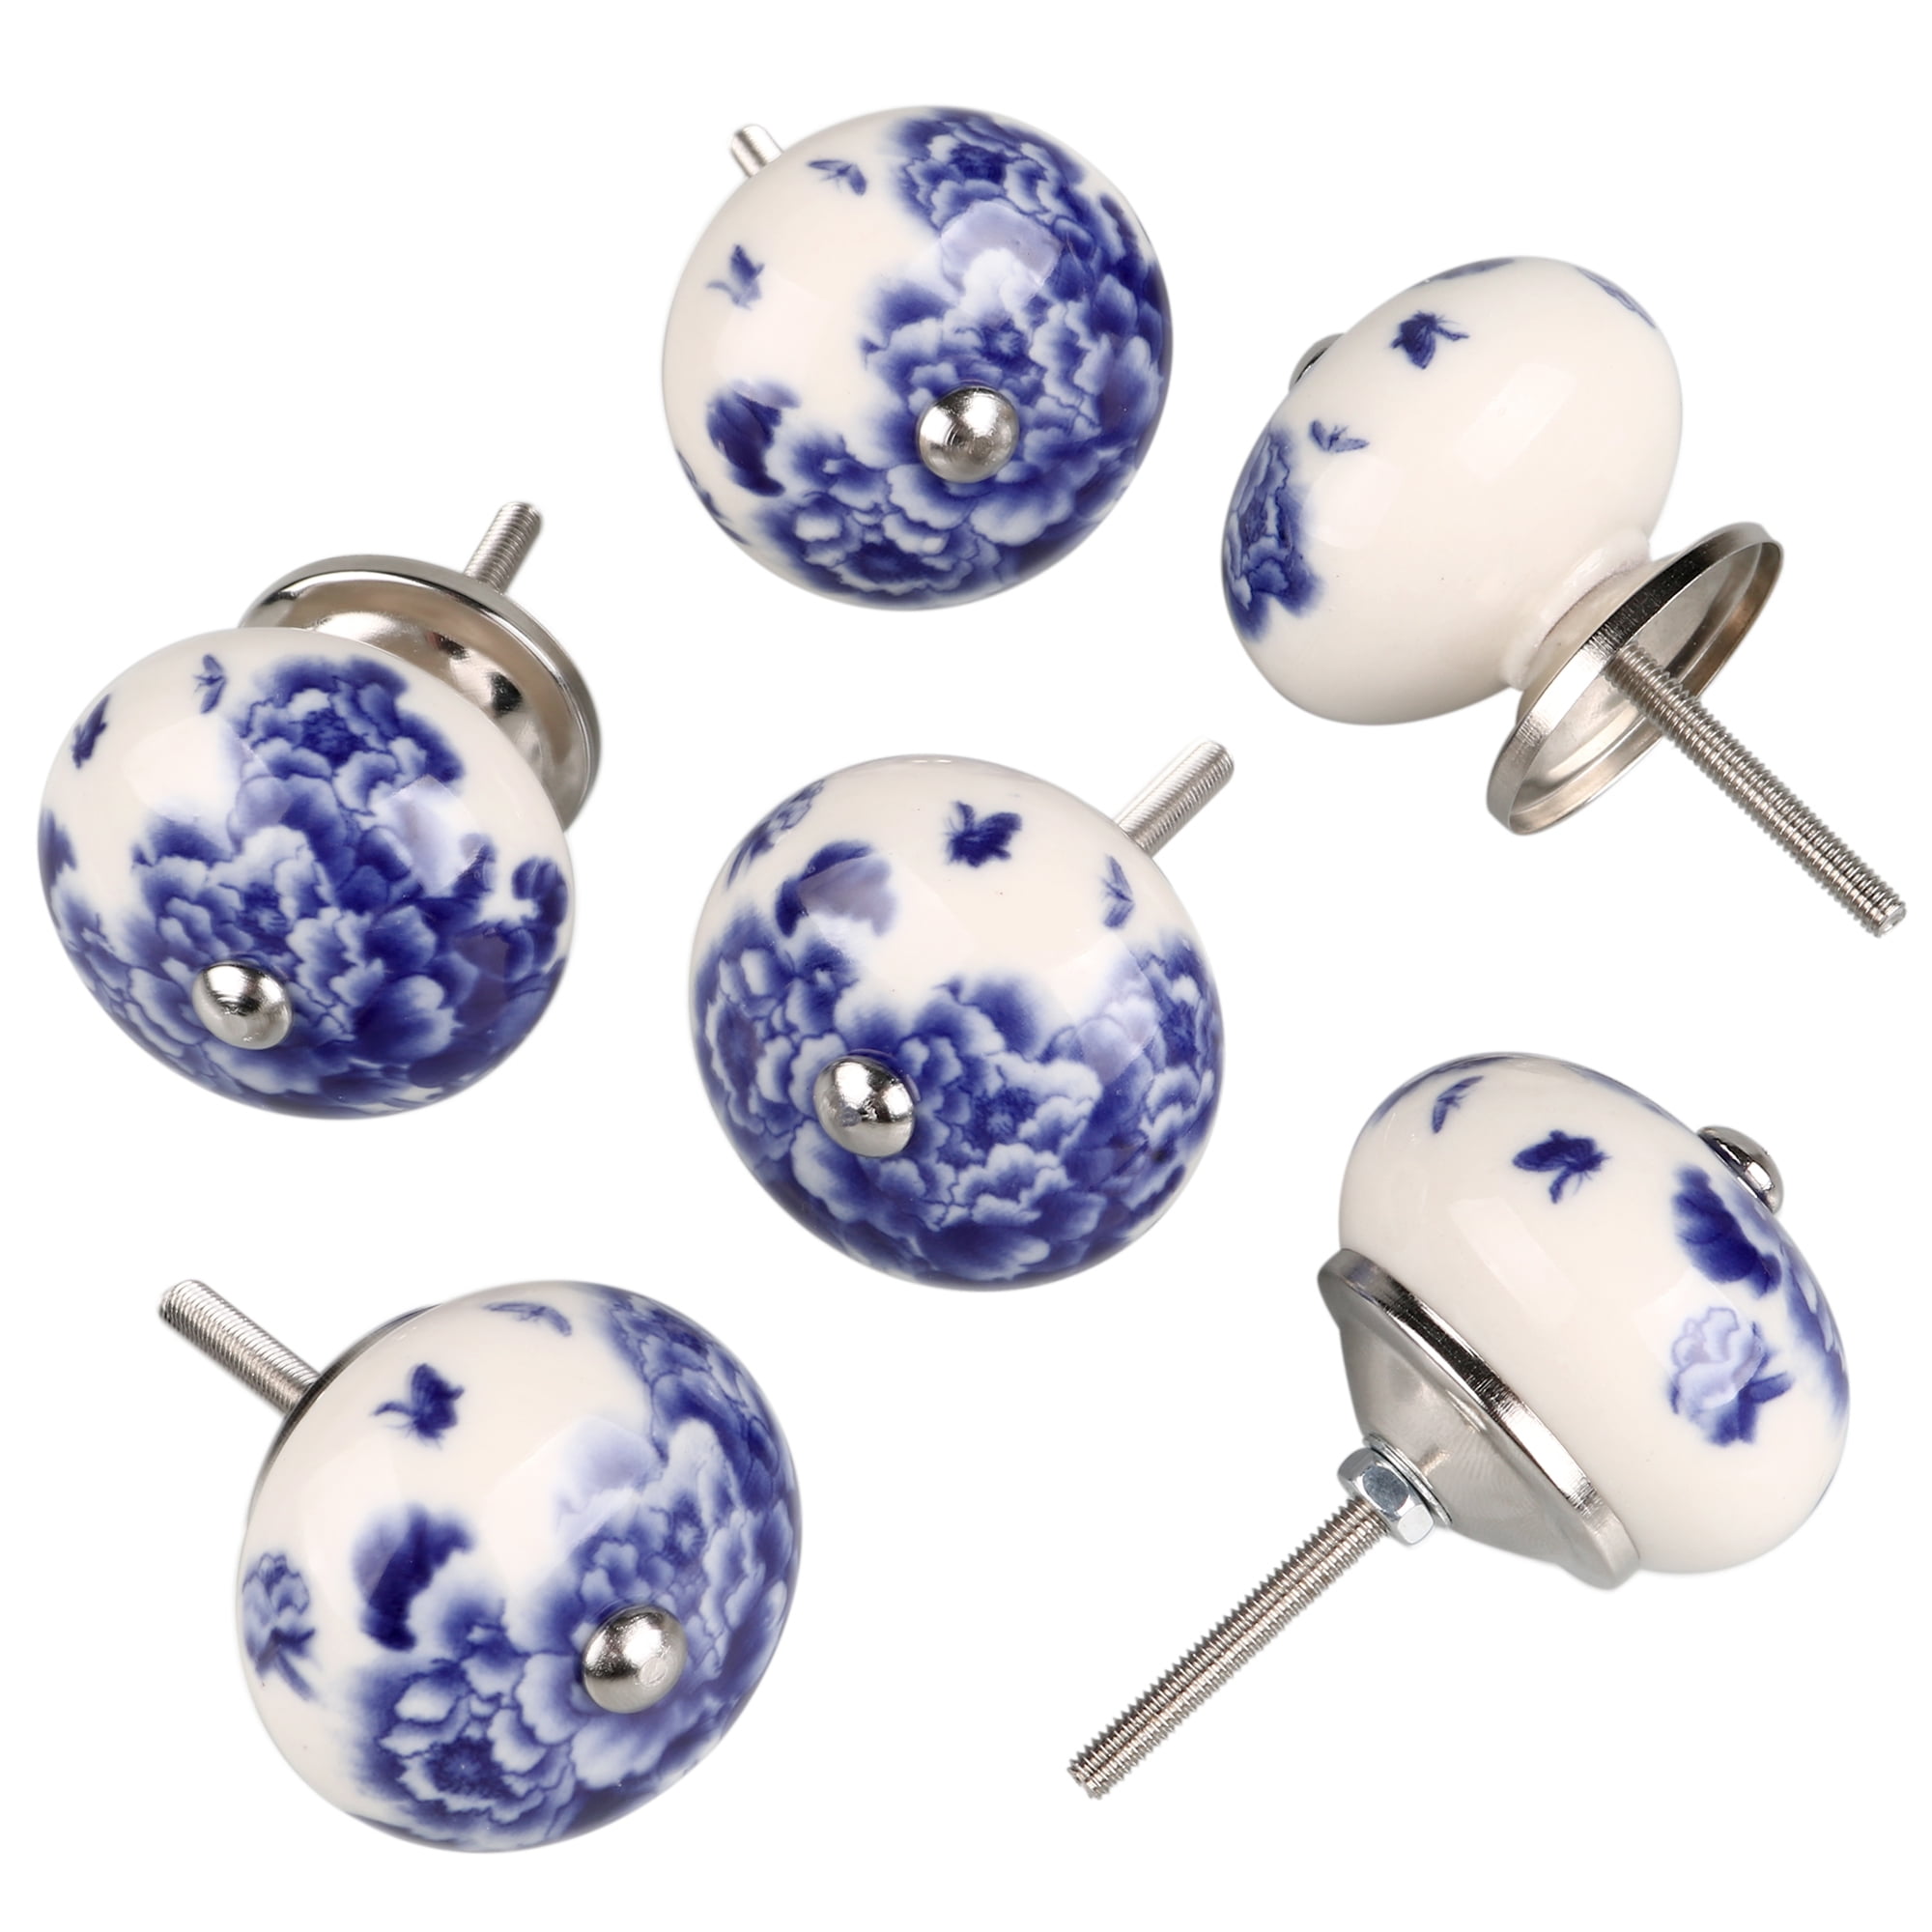 APOTHECARY LABEL & SOAPS 'SHABBY CHIC' STYLE KNOBS FOR CUPBOARDS/ DRAWERS 